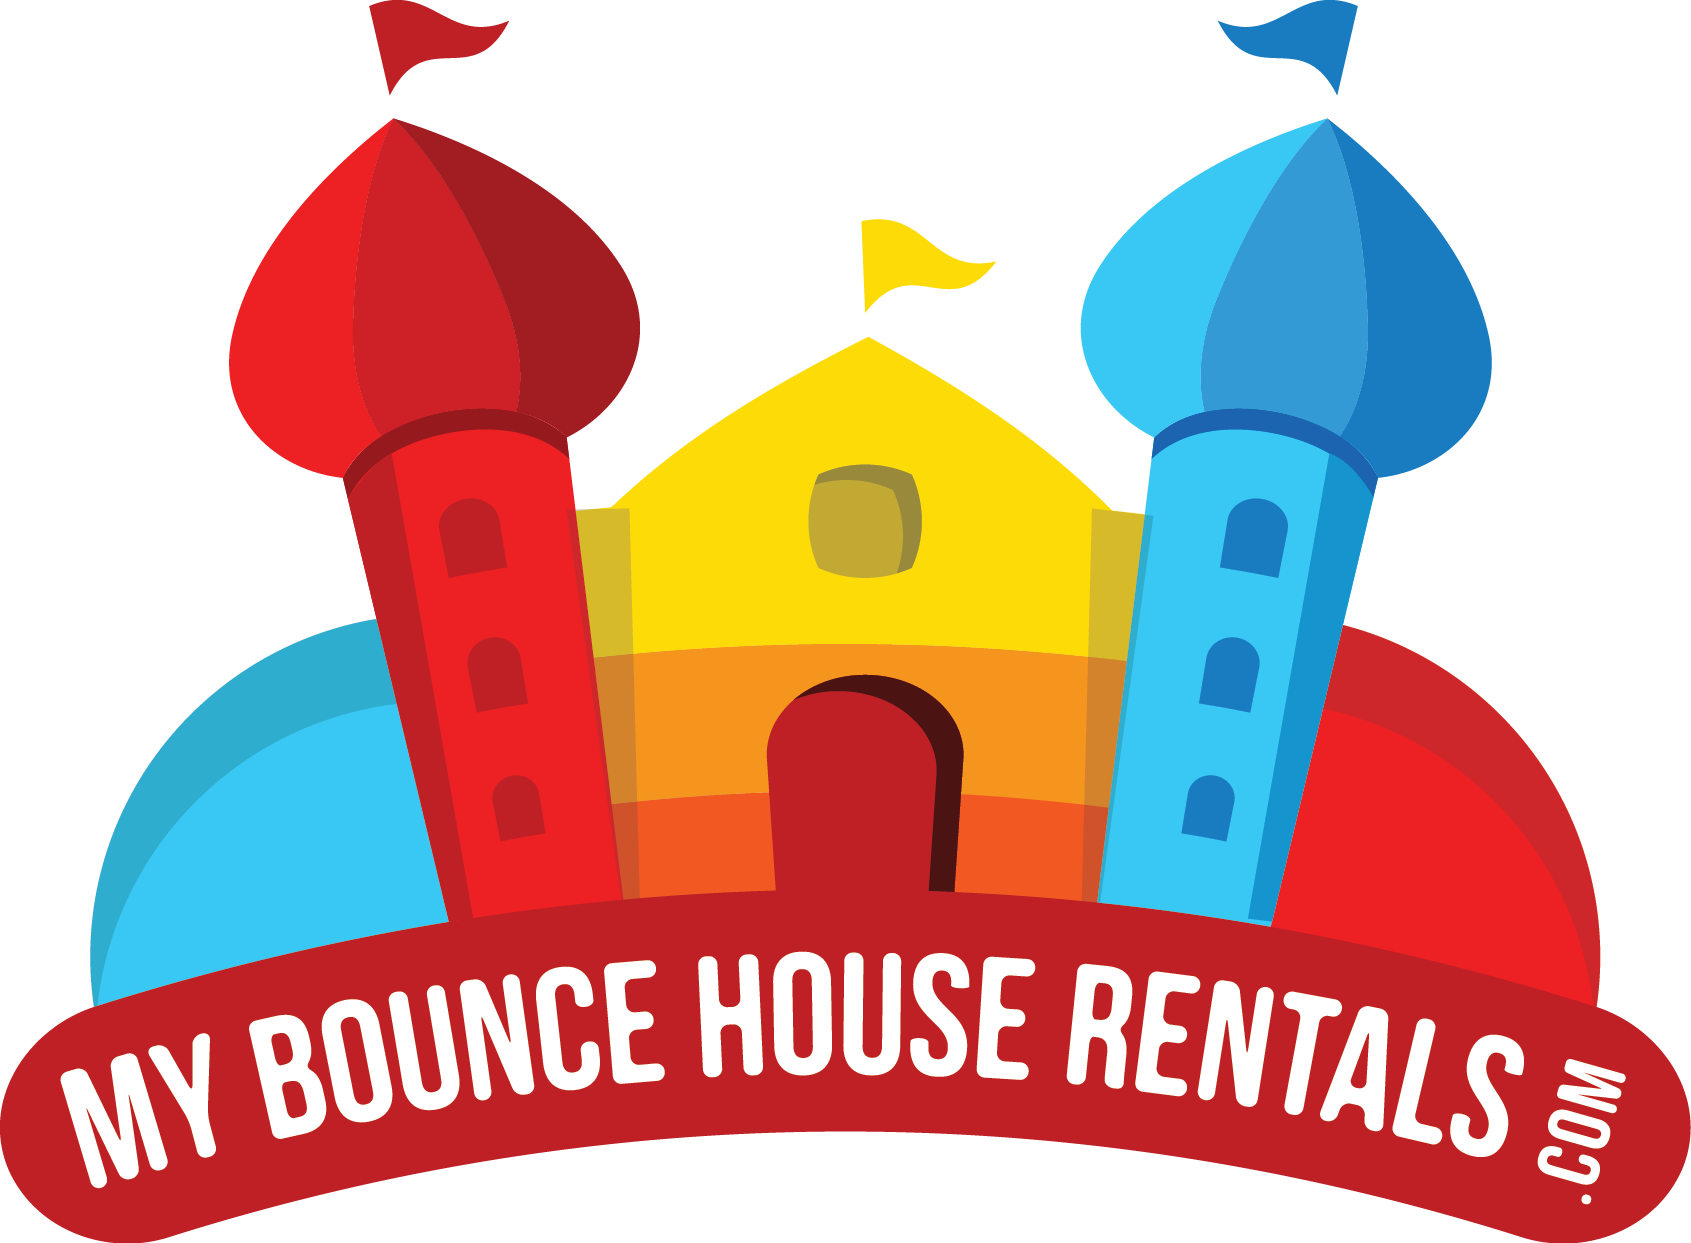 My bounce house rentals of Fort Wayne's Logo